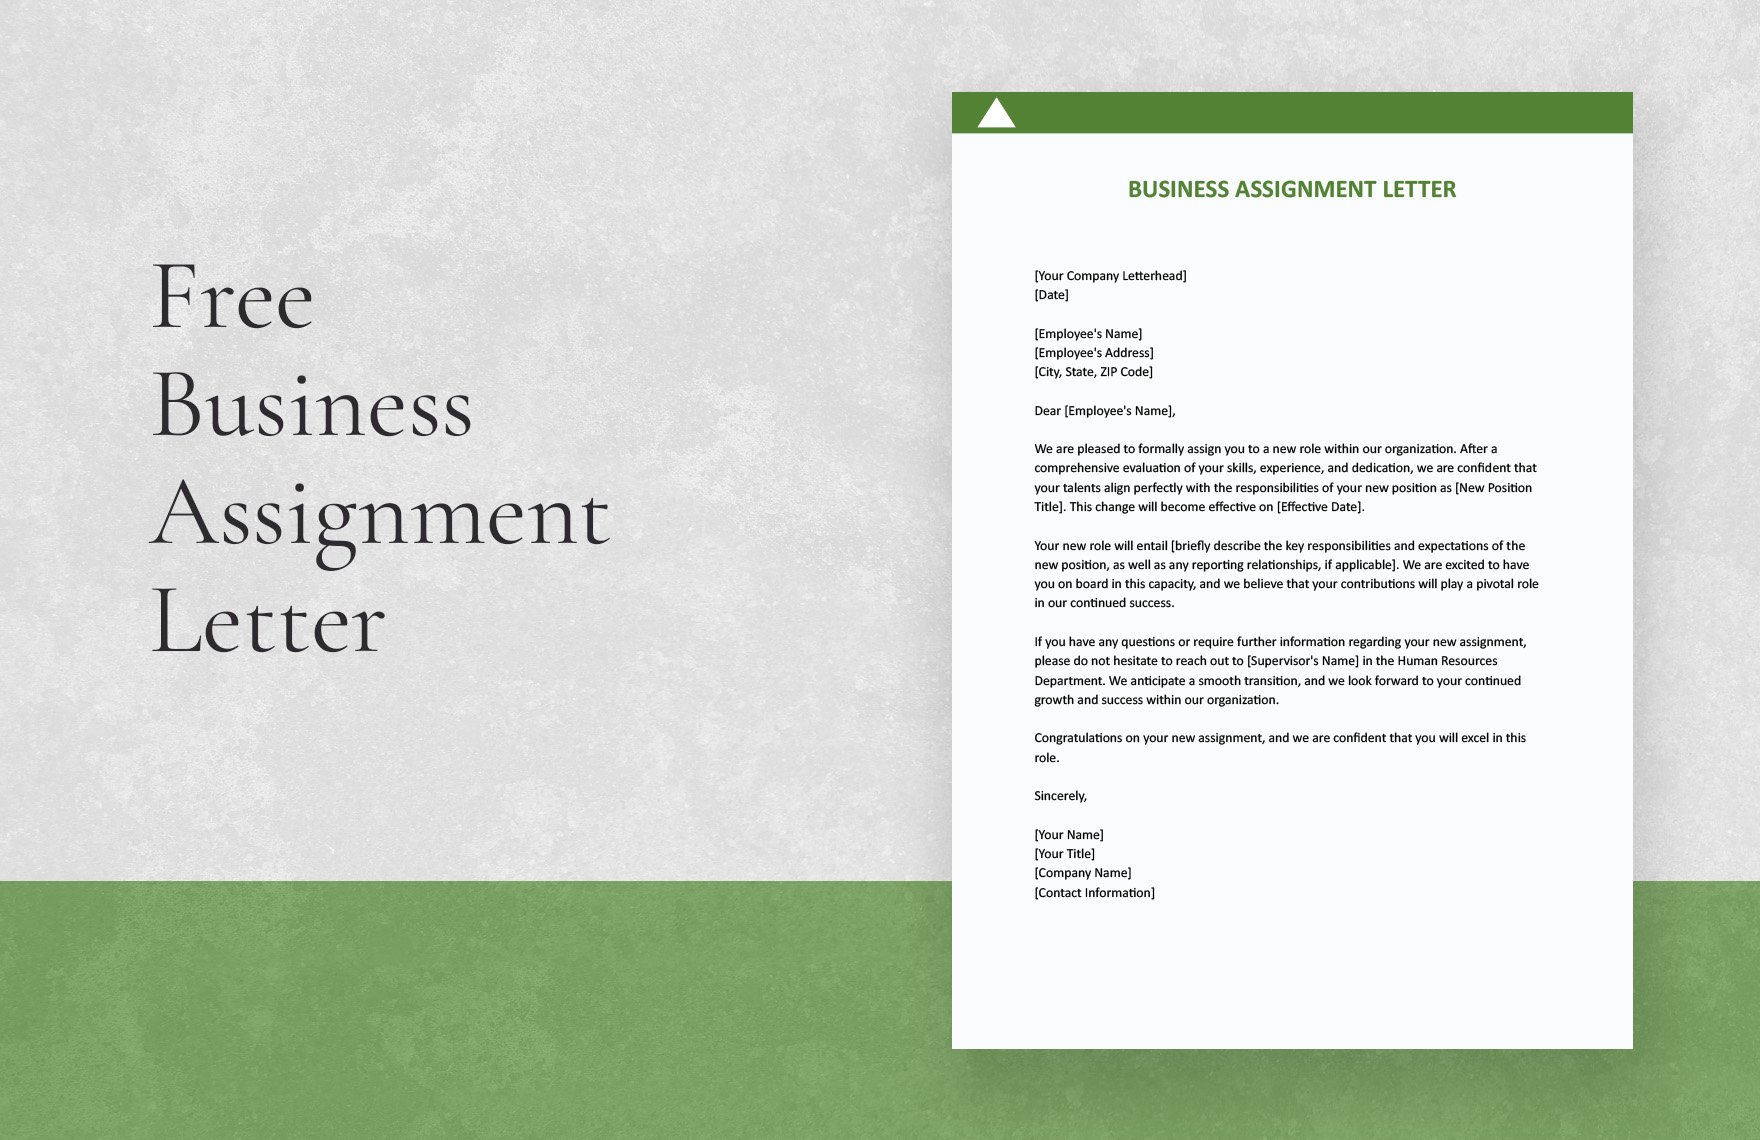 Free Business Assignment Letter